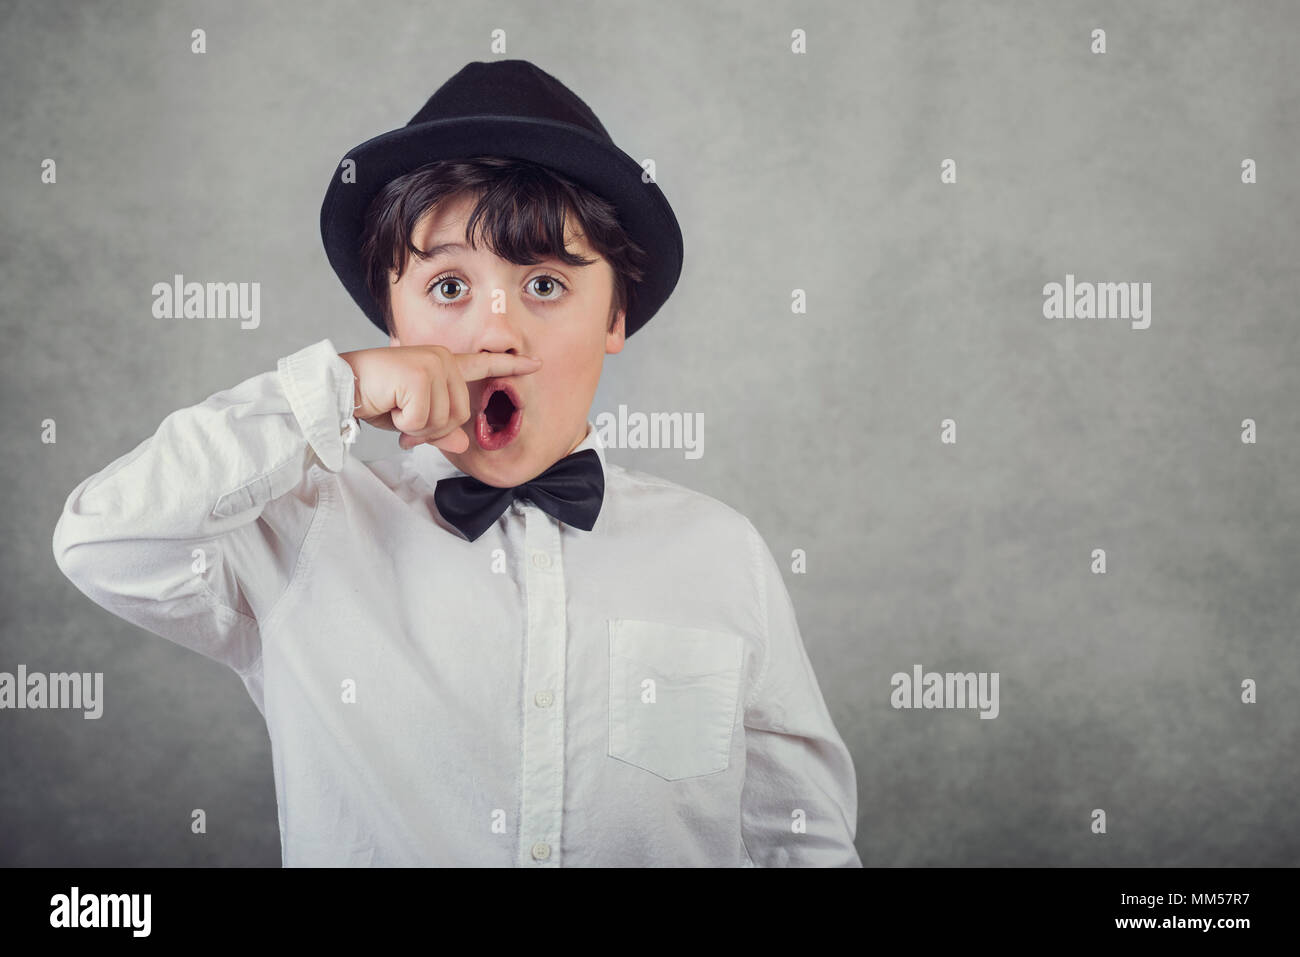 funny boy with hat and bow tie on gray background Stock Photo